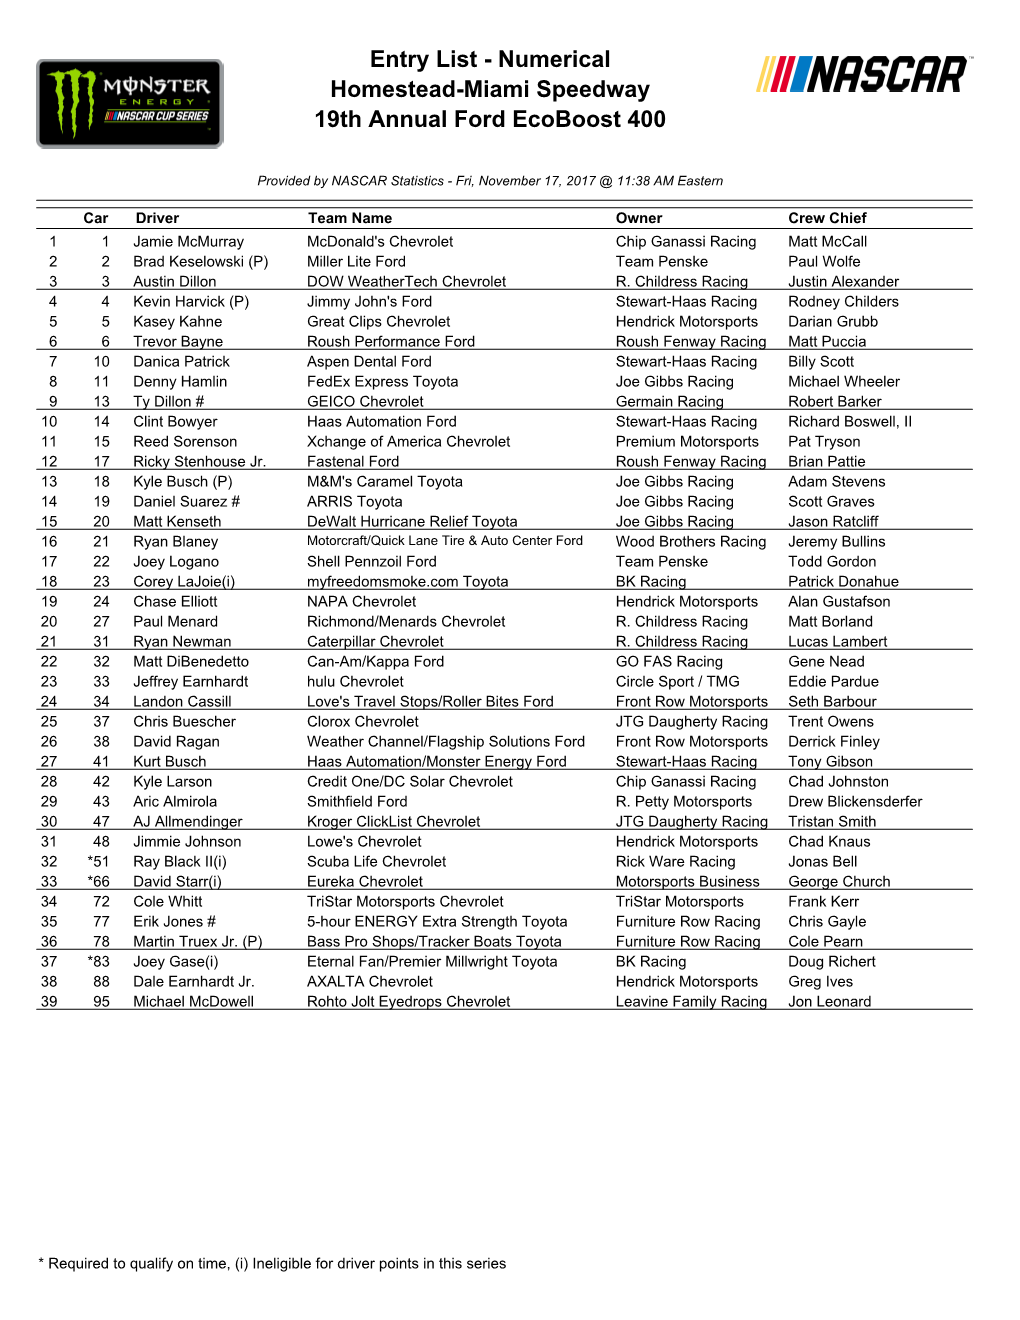 Entry List - Numerical Homestead-Miami Speedway 19Th Annual Ford Ecoboost 400